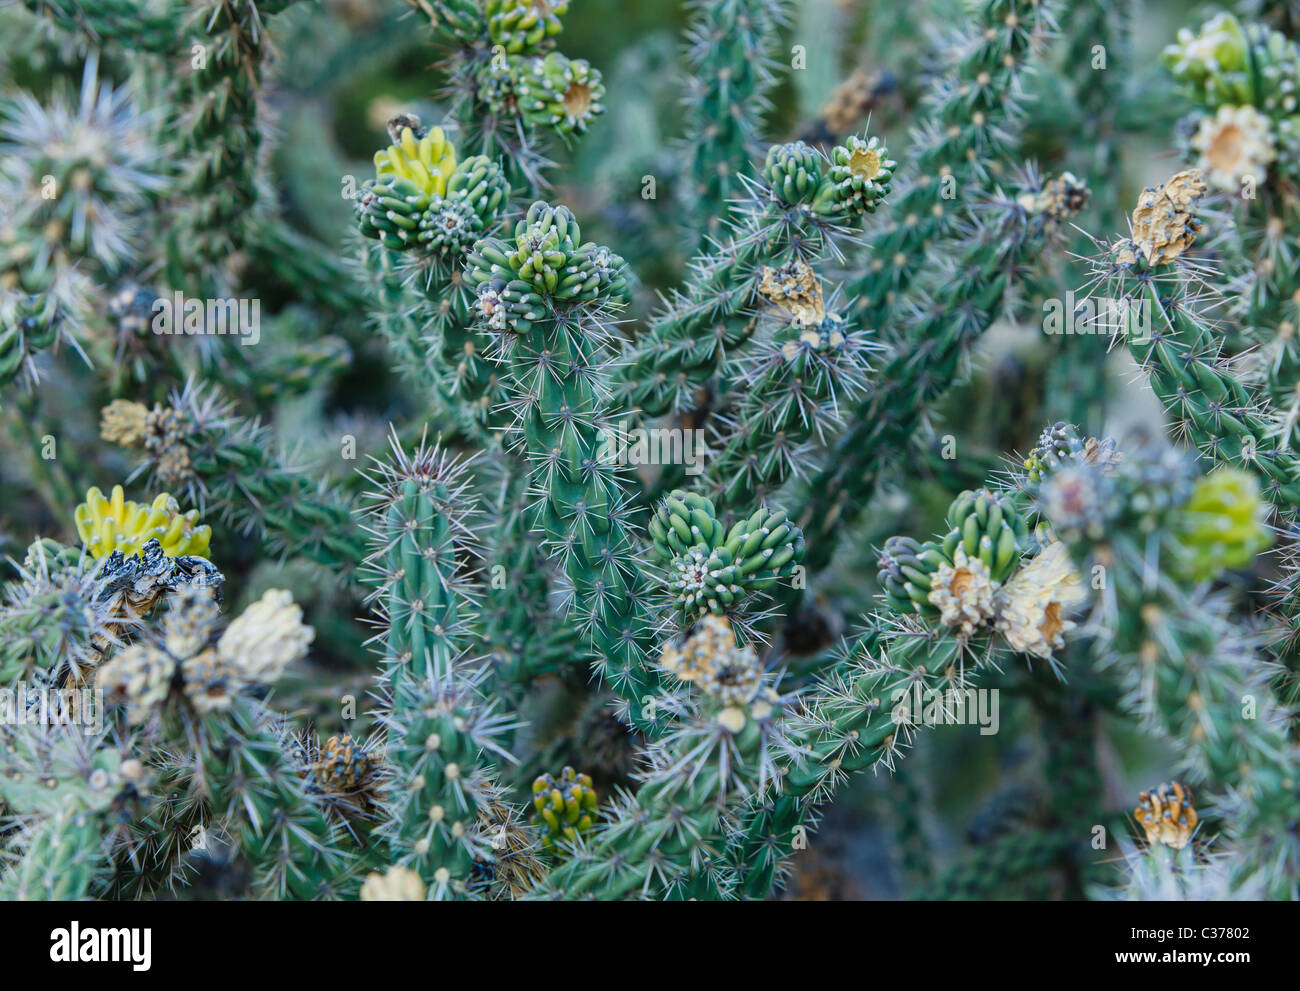 Closeup view of a Cholla cactus in the foothills of the Sandia mountains outside Albuquerque, New Mexico, USA. Stock Photo